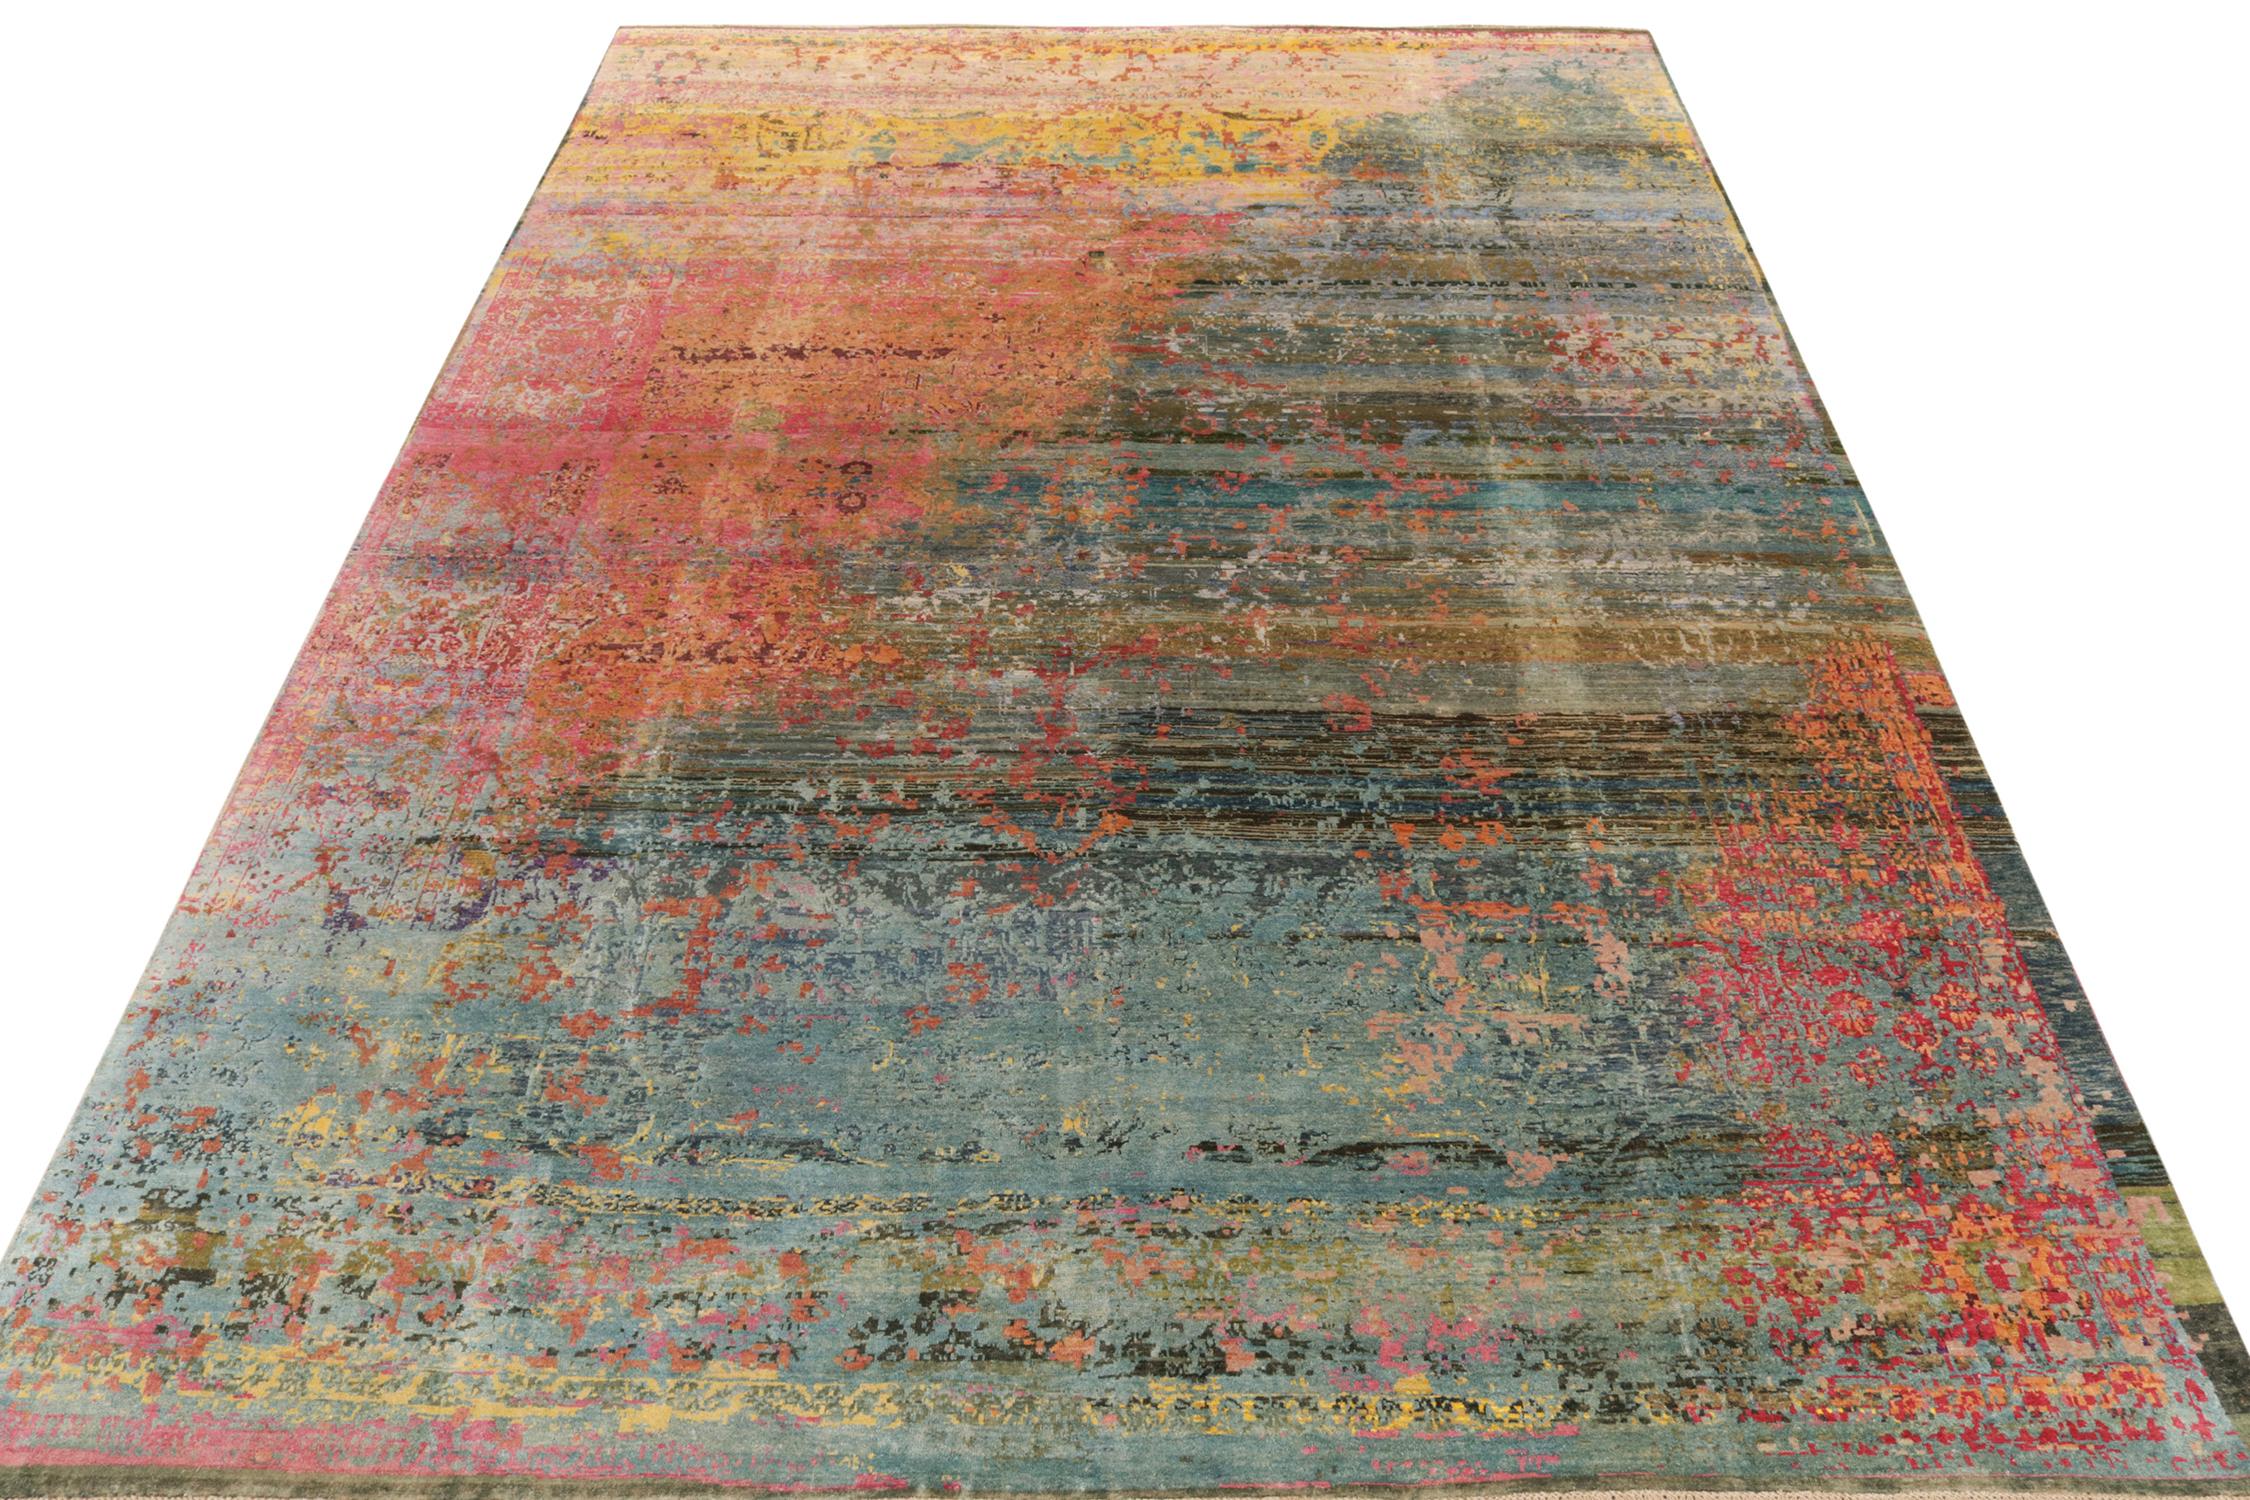 A gracious 10x14 rug from the boldest new additions to Rug & Kilim’s Abstract collection. The boisterous imagination is inspired subtly from Agra elements adapting to a modern piece full of life and riot of color. The lustrous appeal of the fine